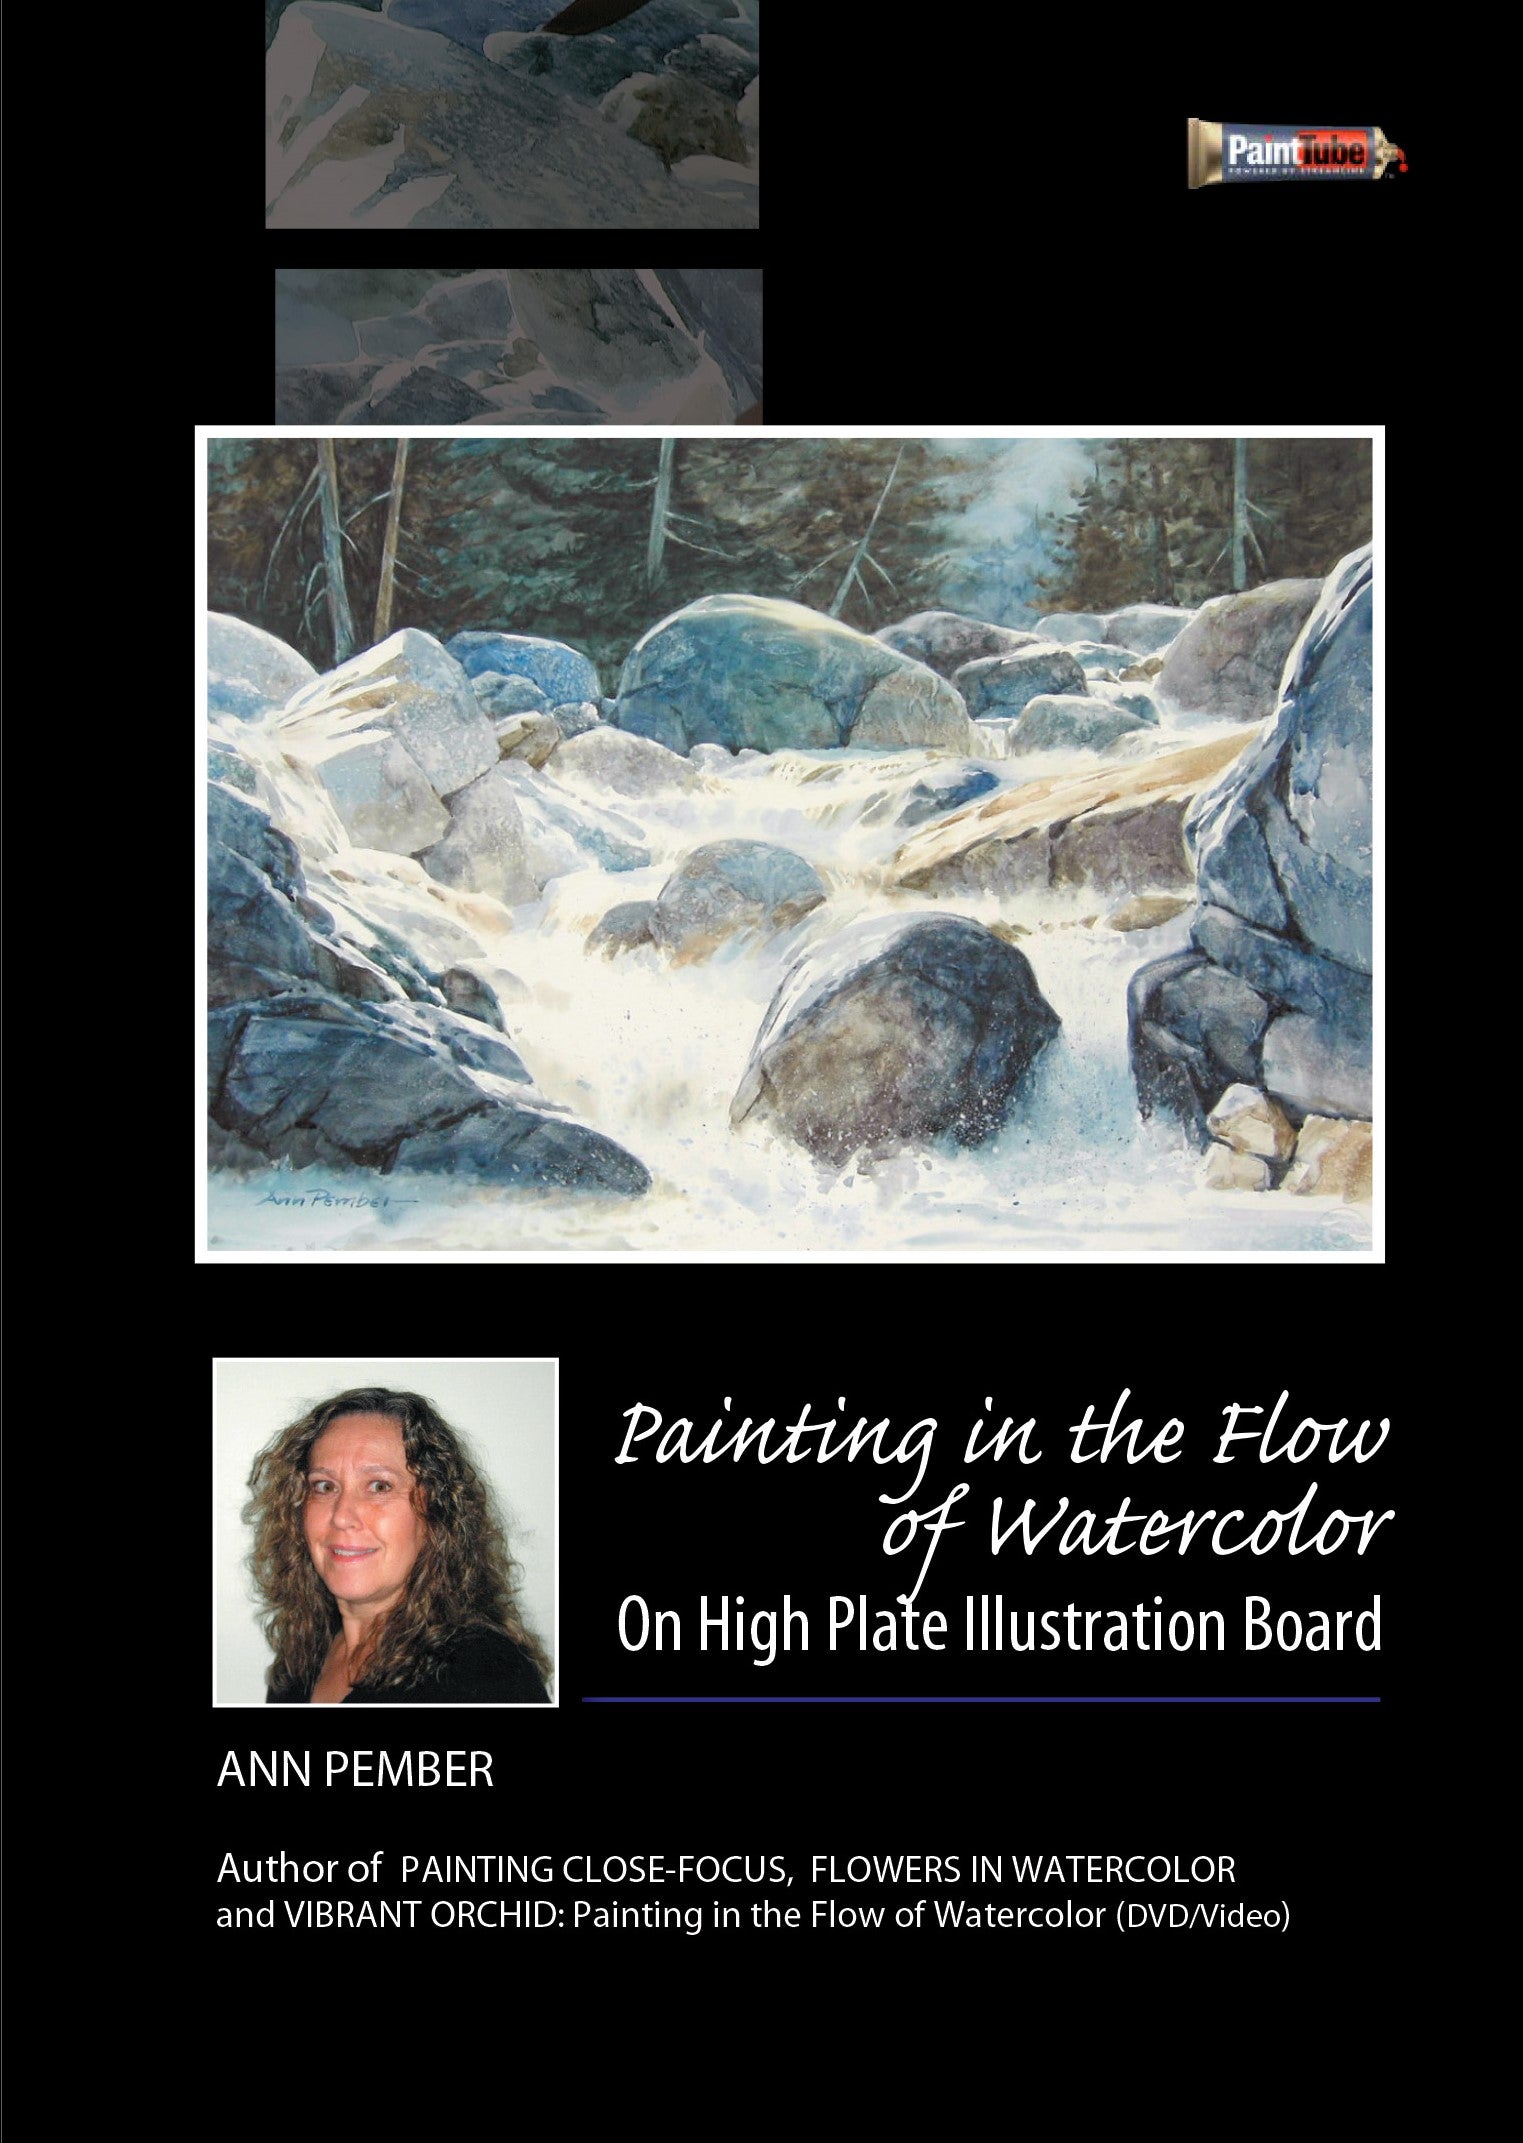 Ann Pember: Painting in the Flow of Watercolor On High Plate Illustration Board